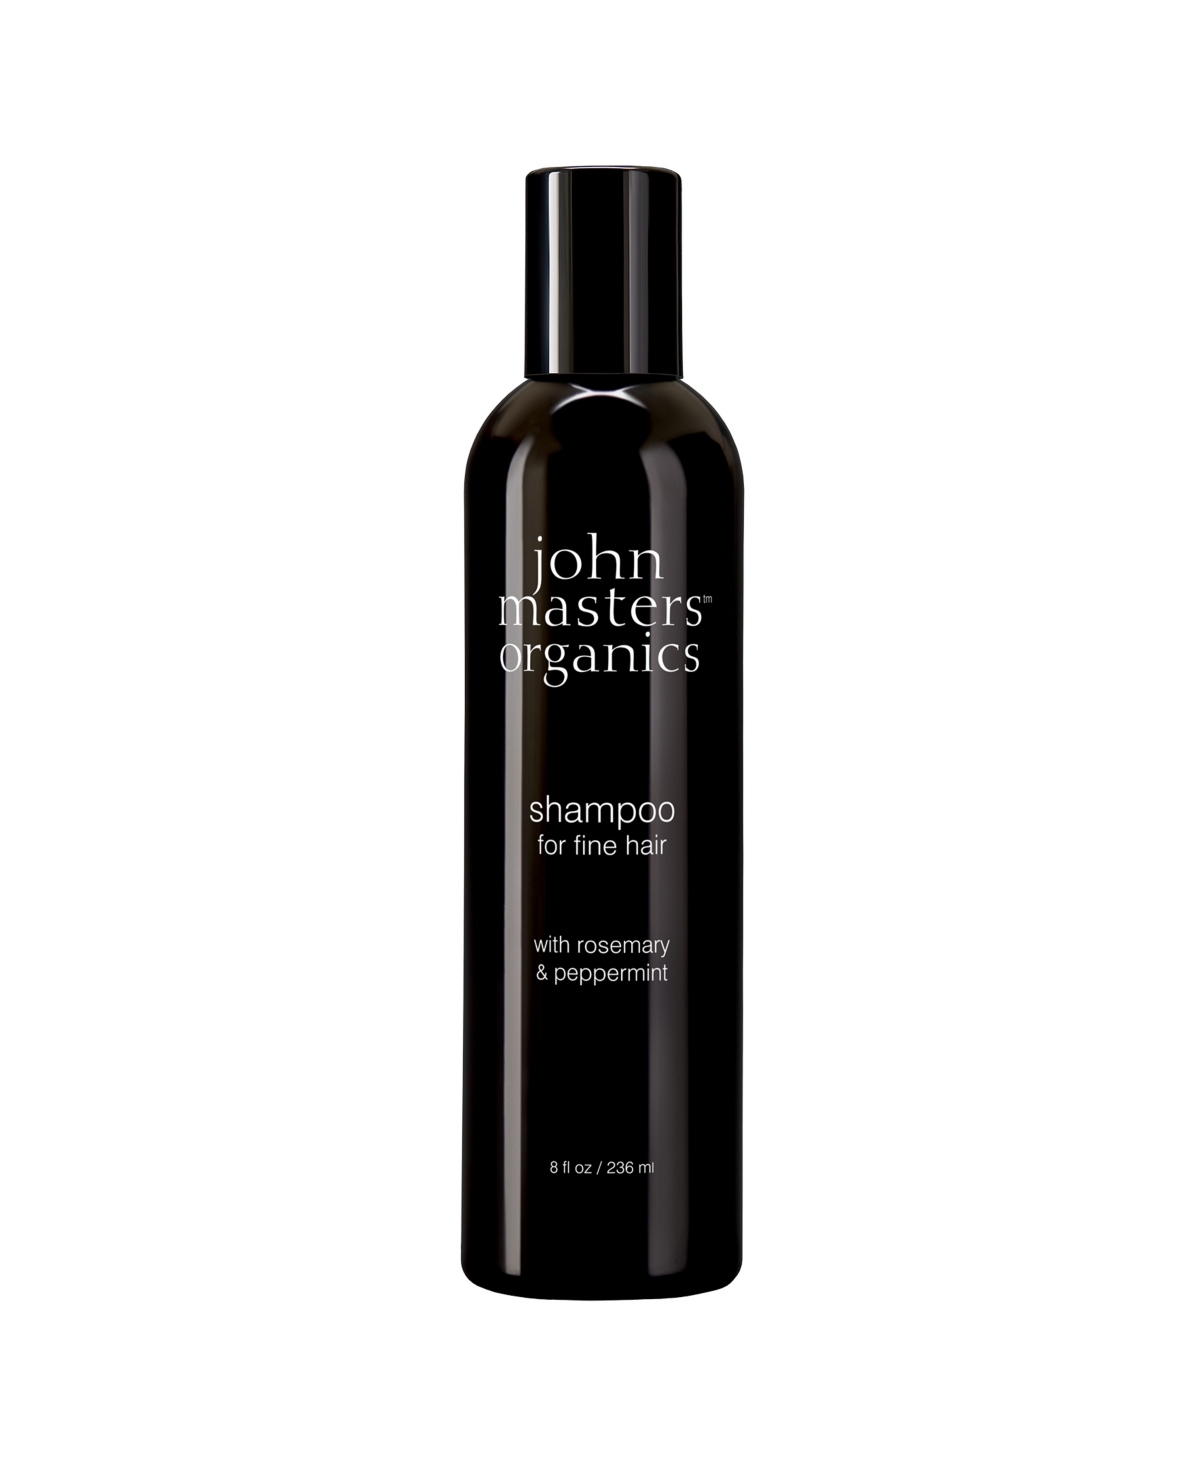 John Masters Organics Shampoo for Fine Hair with Rosemary and Peppermint- 8 fl. oz.